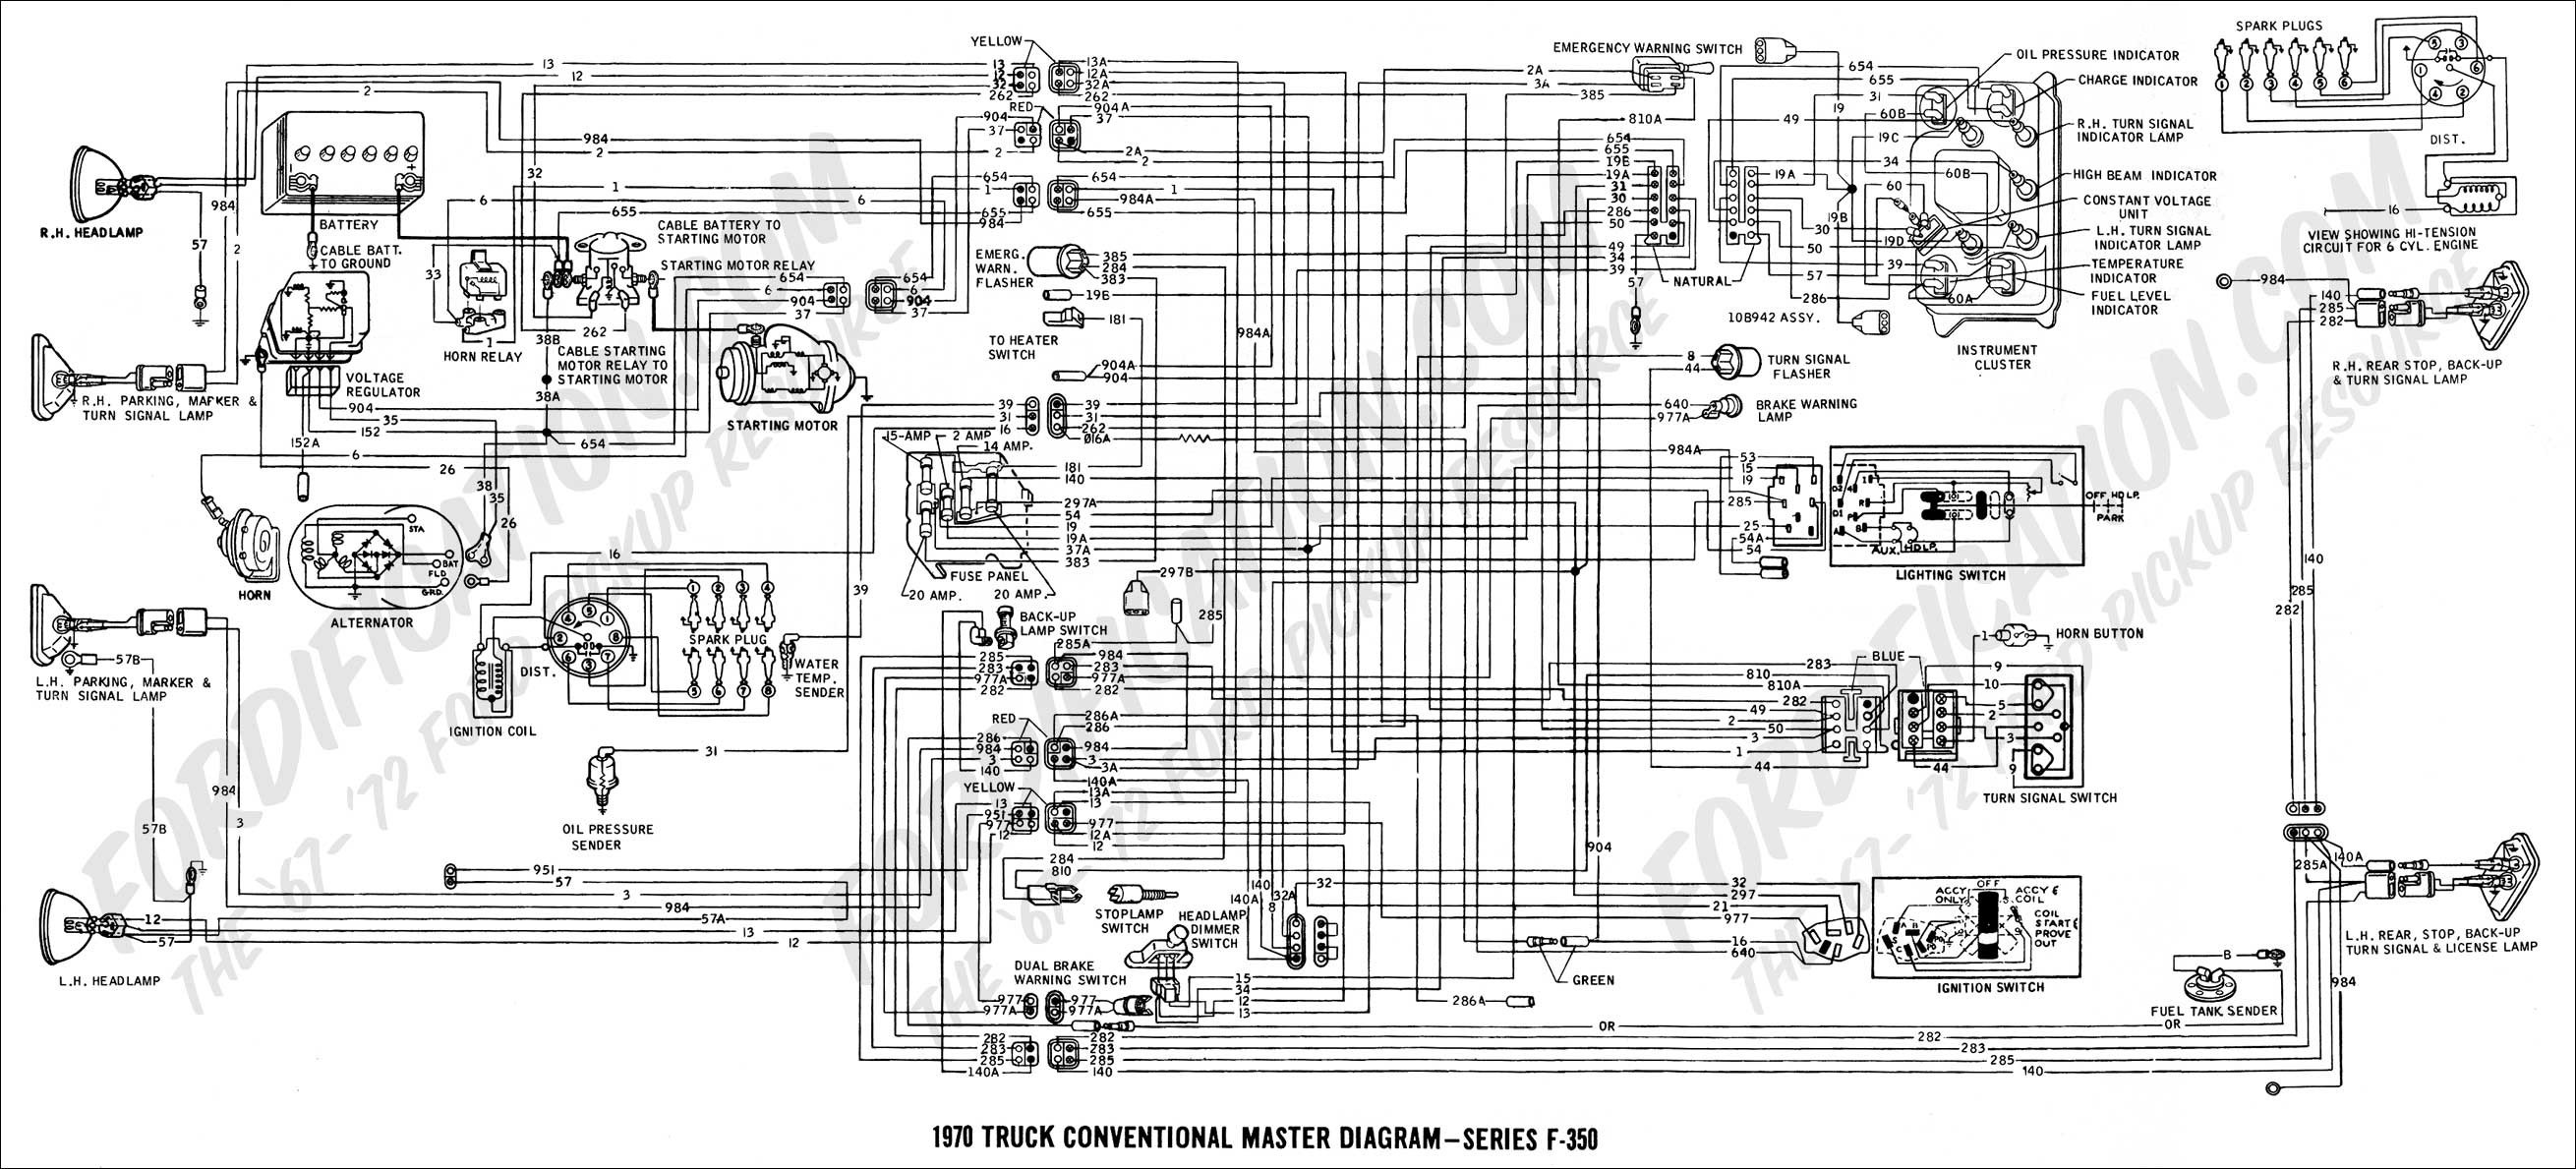 Gm Starter solenoid Wiring Diagram Best ford Truck Technical Drawings and Schematics Section H Wiring